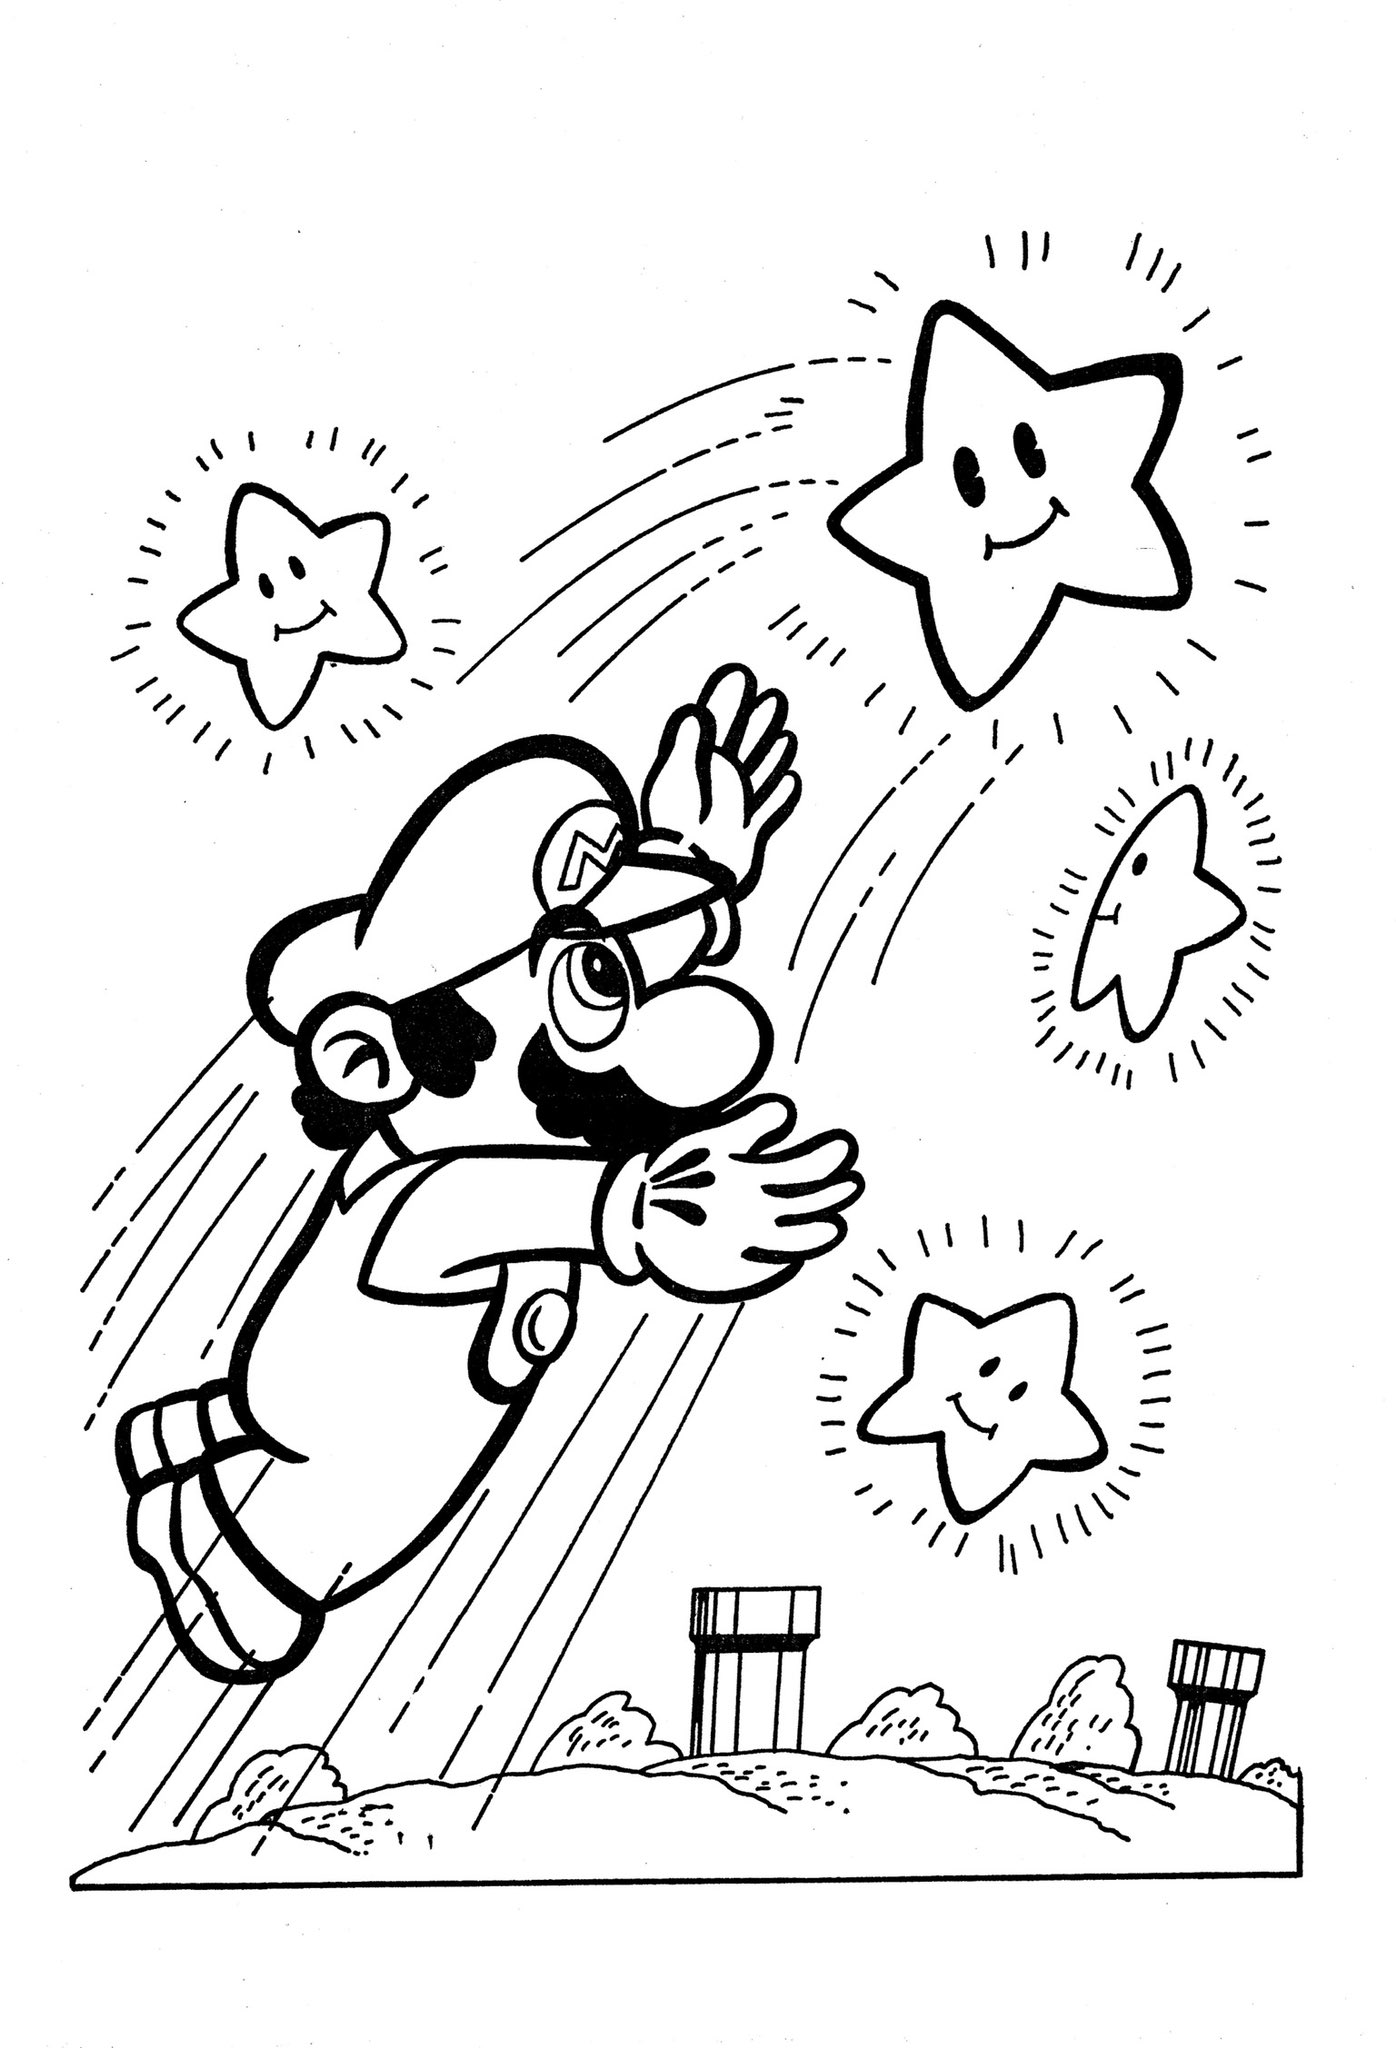 Videogamearttidbits on x four pages from a super mario bros coloring book httpstcovzoyzghfl x